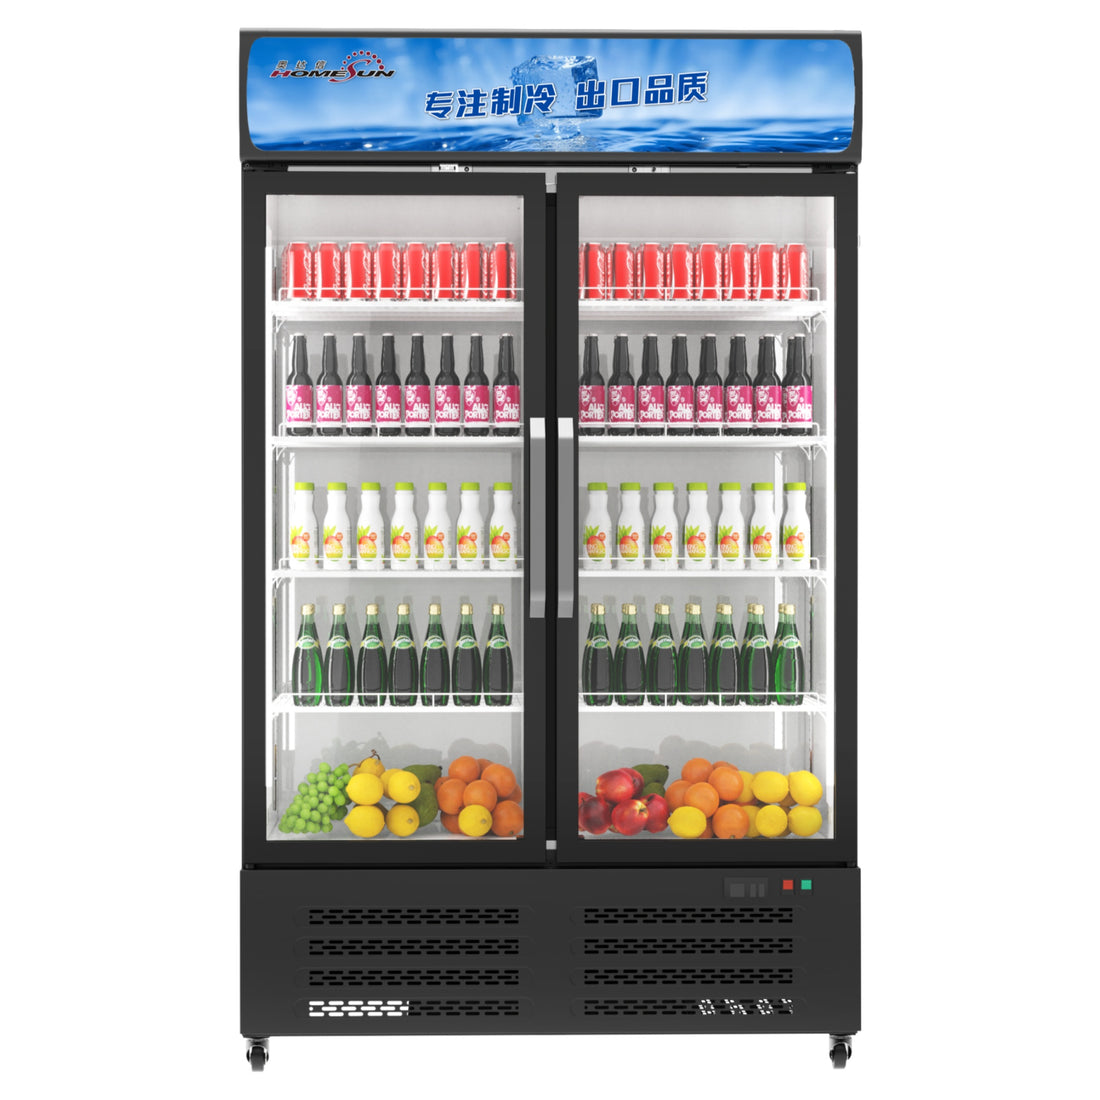 115V 400W Commercial Refrigerator 36.3 cu.ft with LED, Glass Door